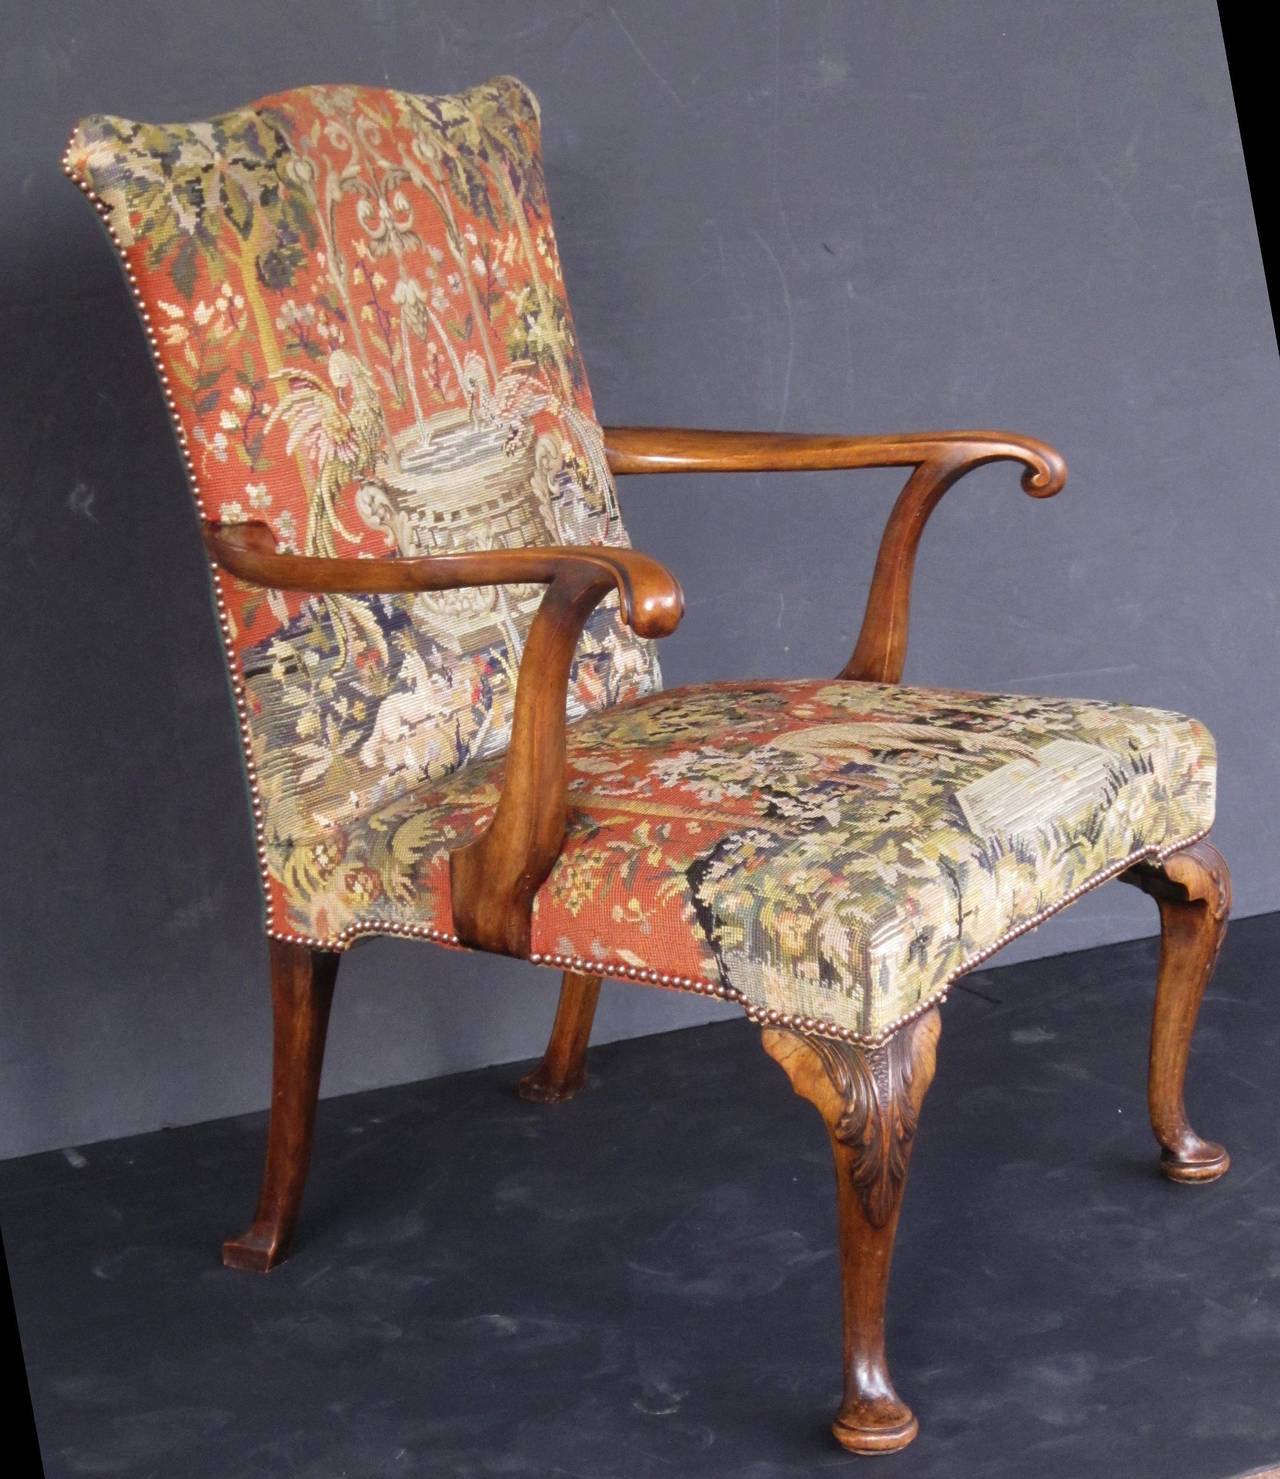 British Large English Upholstered Arm Chair - Gainsborough Style